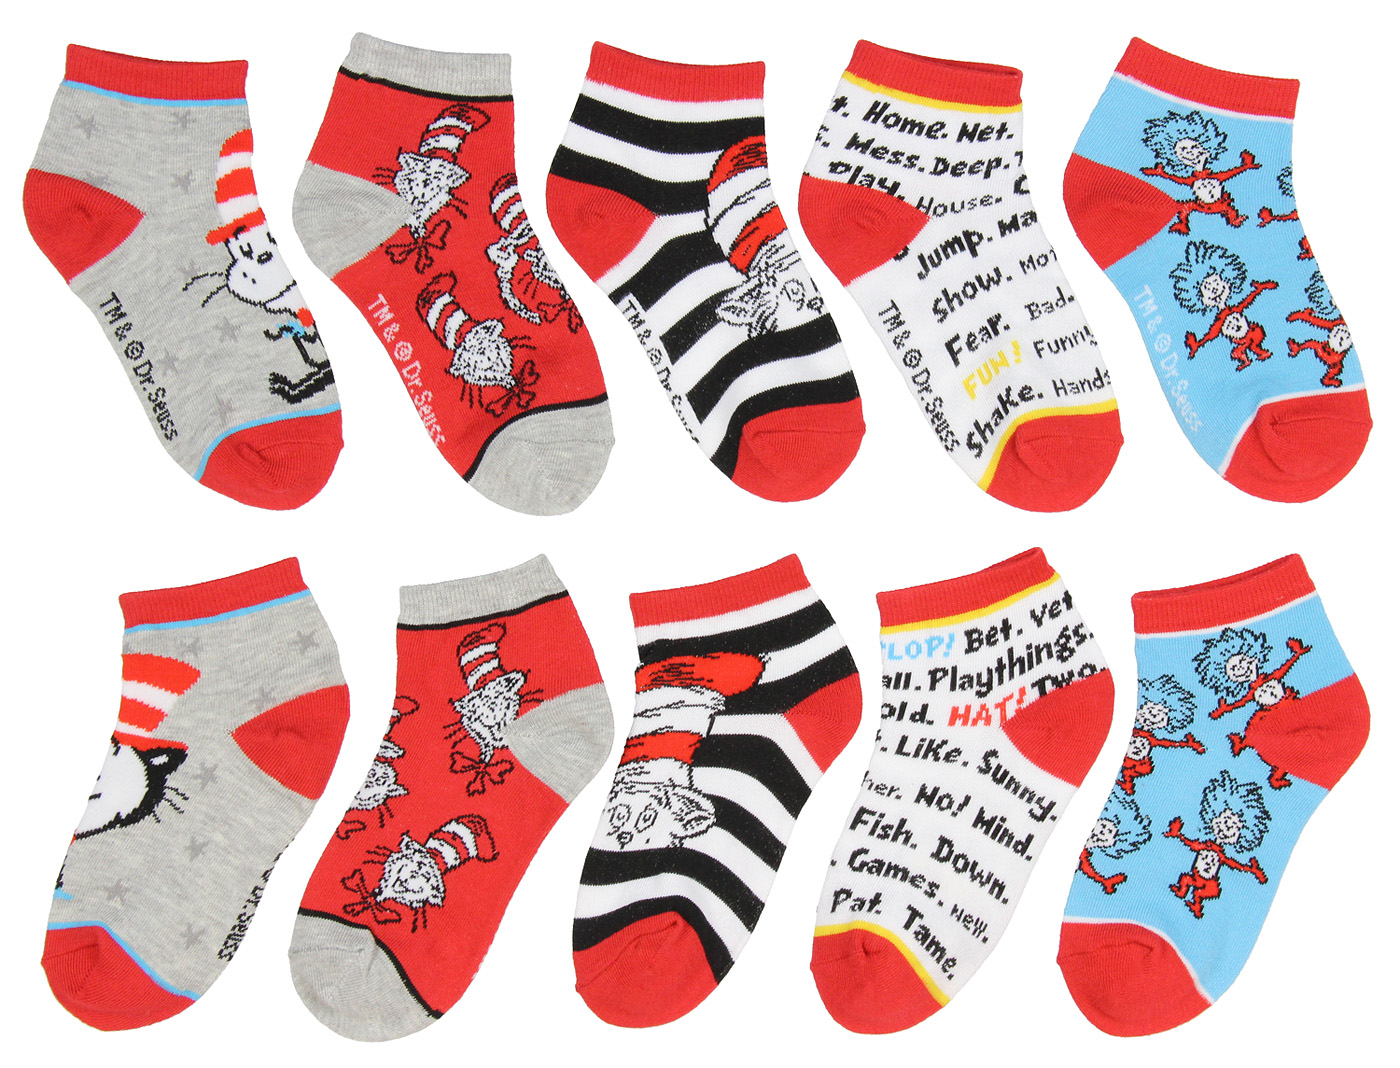 Dr. Suess Dr. Seuss Socks Kids Cat In The Hat Thing 1 Thing 2 Ankle No Show Socks - 5 Pack For Boys Or Girls